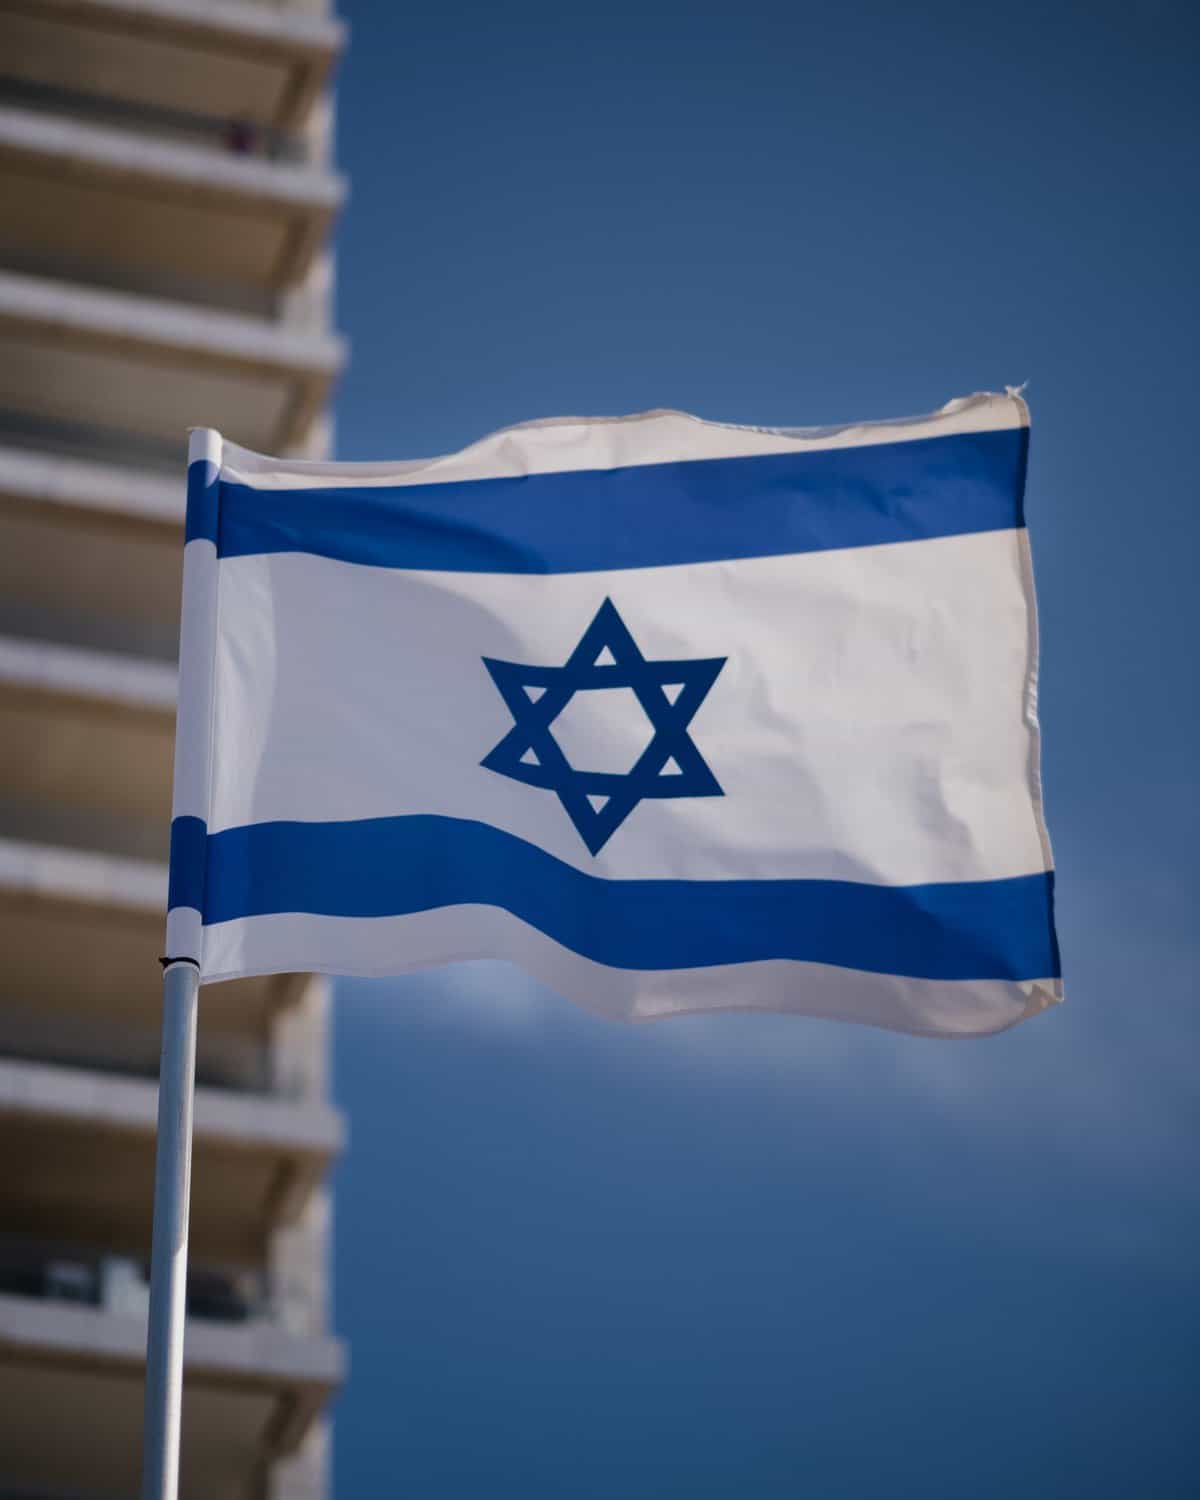 Israel's flag is shown waving in the wind with the corner of a high-rise building as a backdrop.